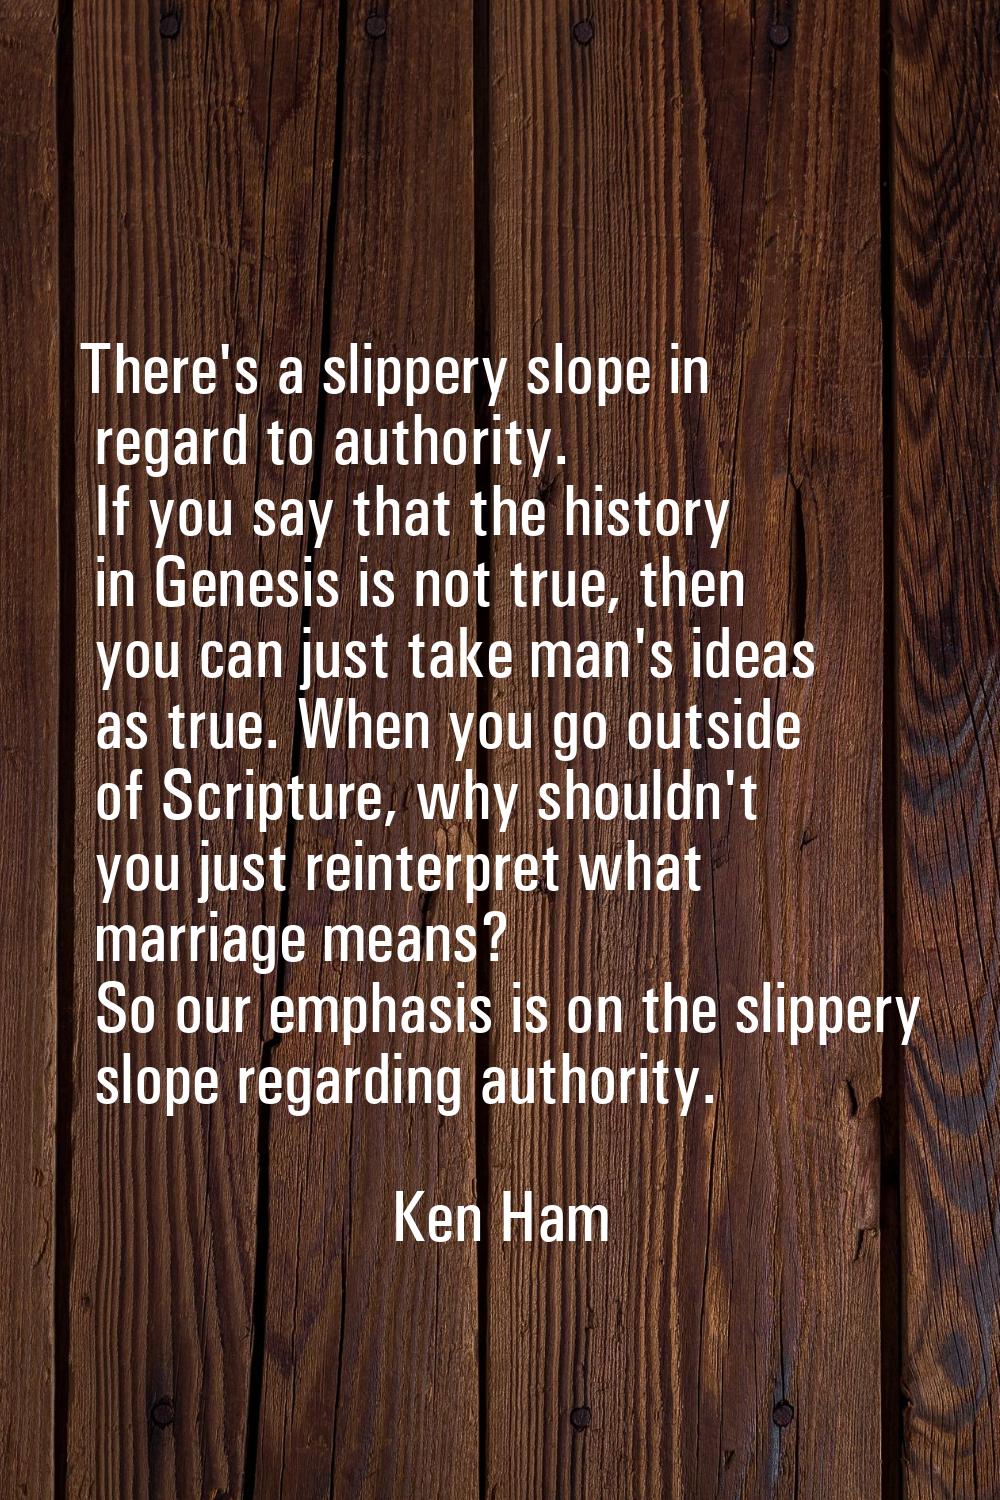 There's a slippery slope in regard to authority. If you say that the history in Genesis is not true